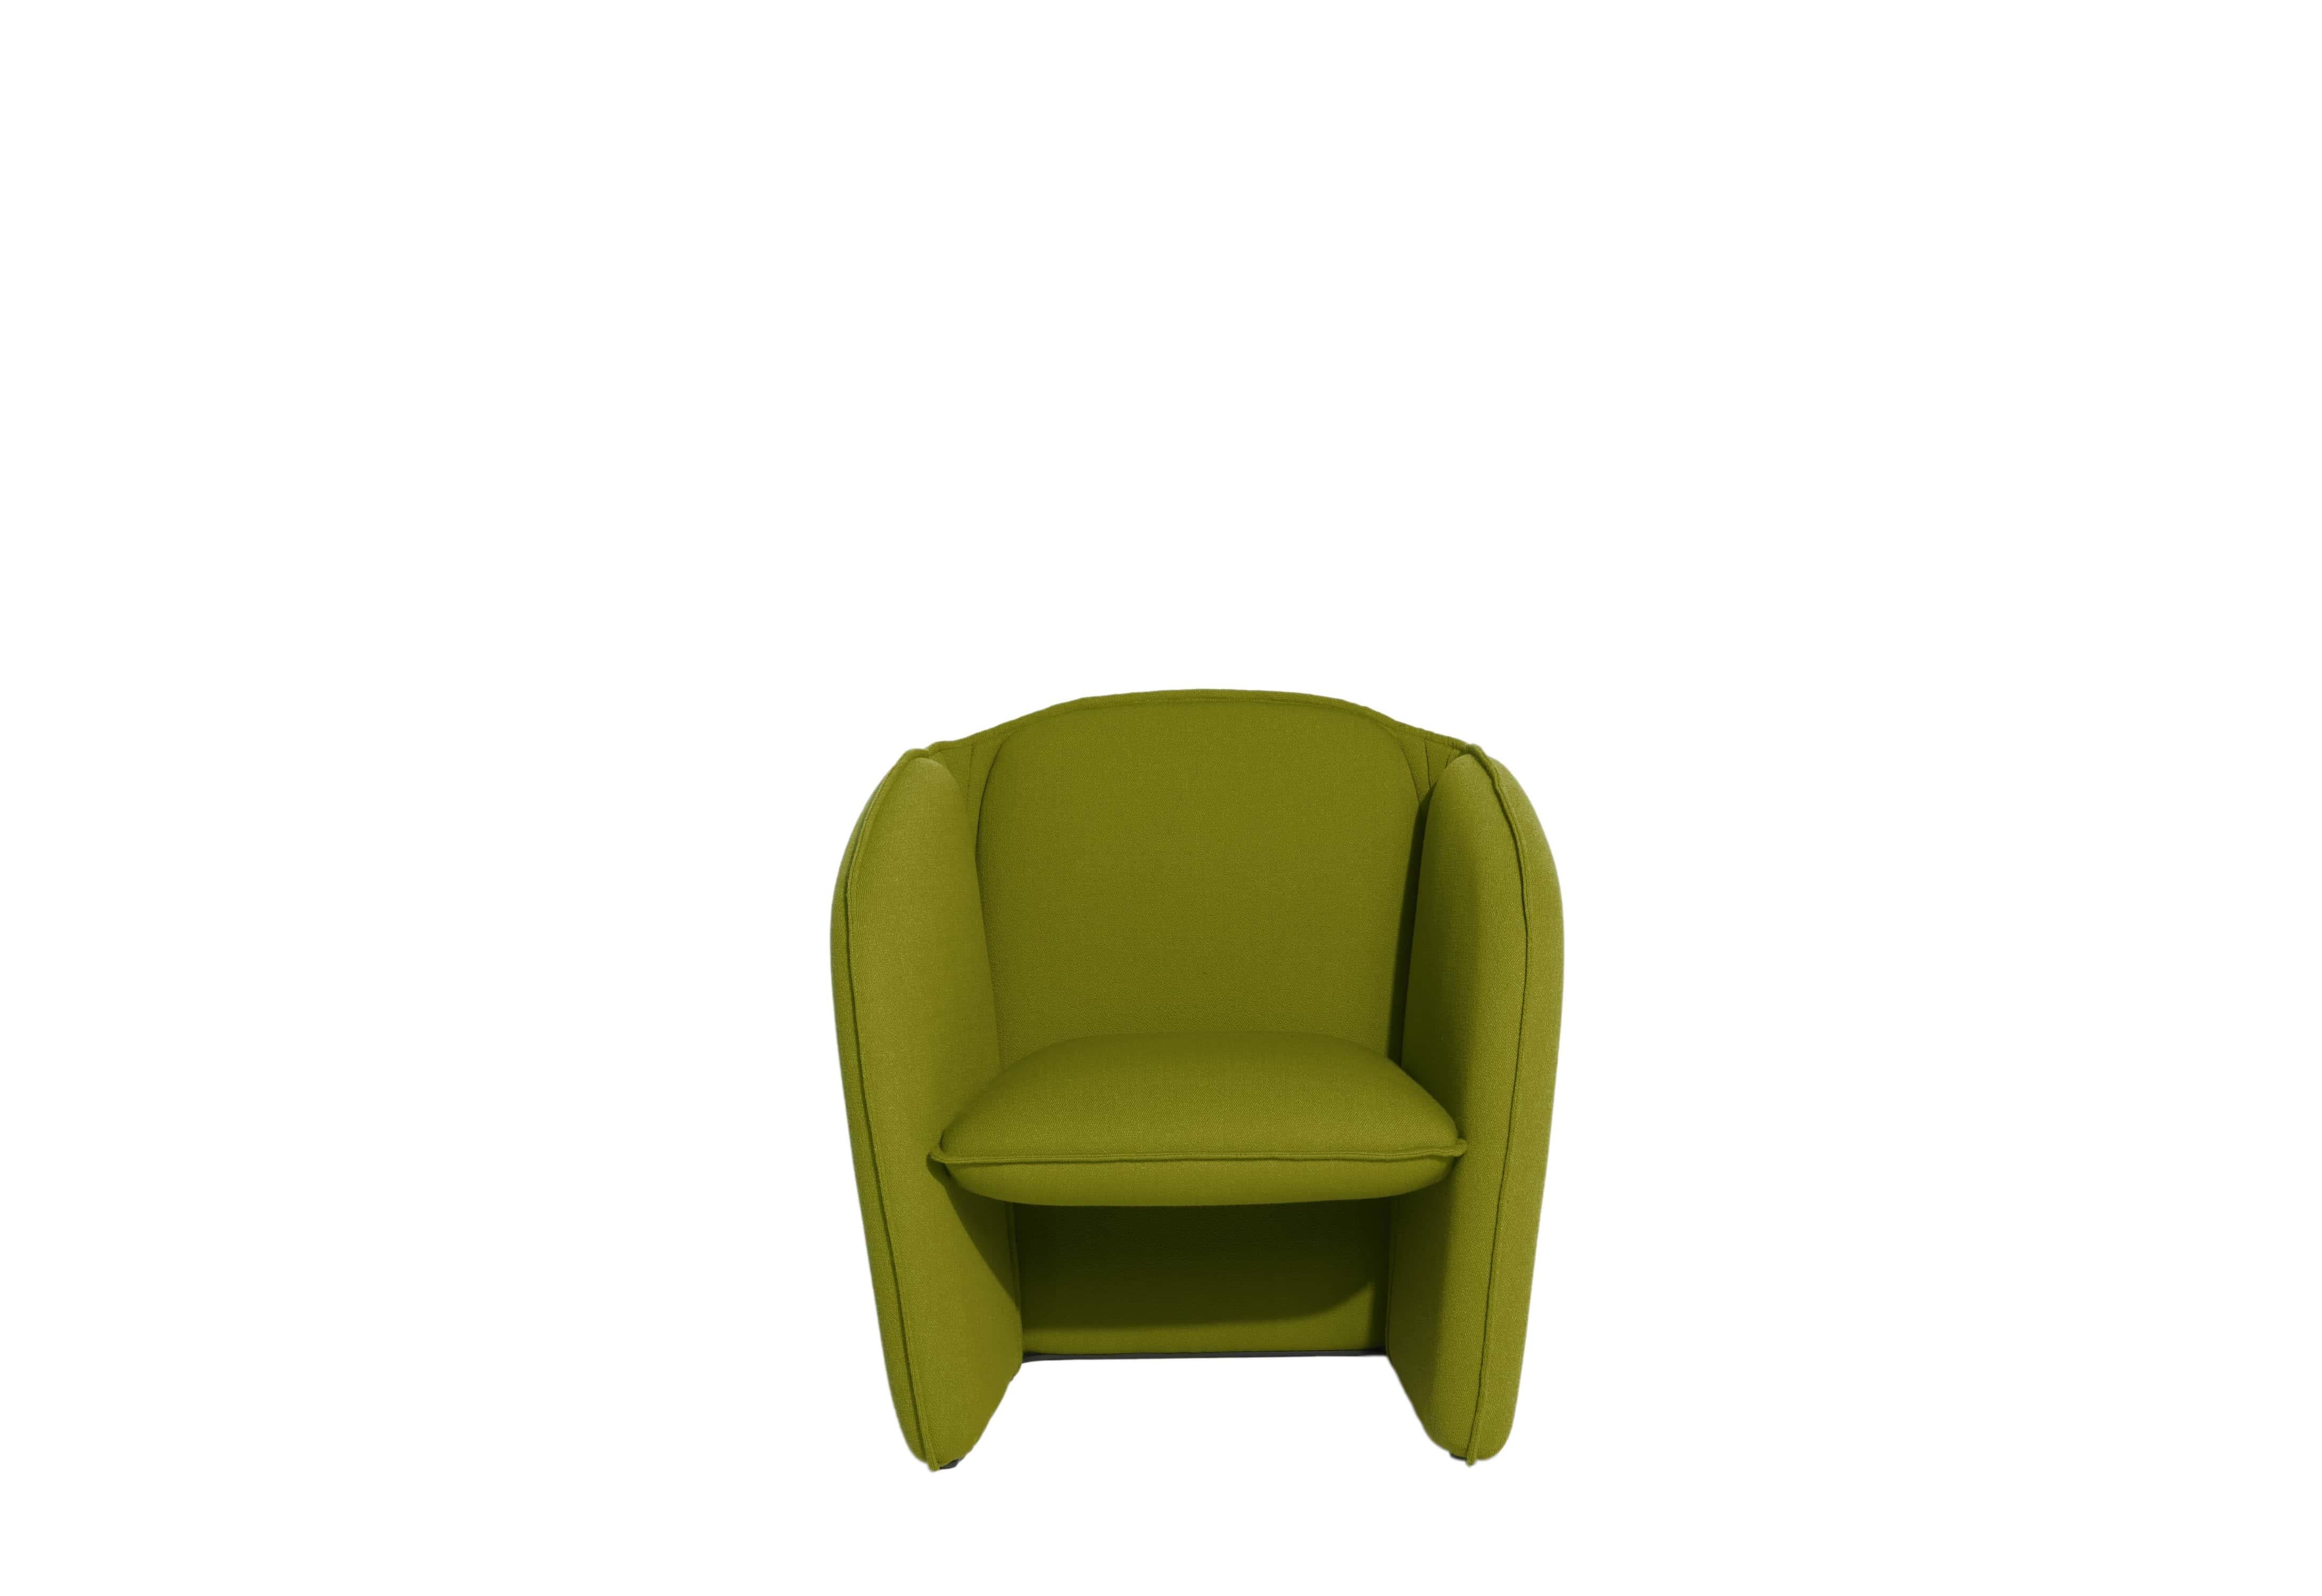 Contemporary Petite Friture Lily Armchair in Olive Green by Färg & Blanche, 2022 For Sale